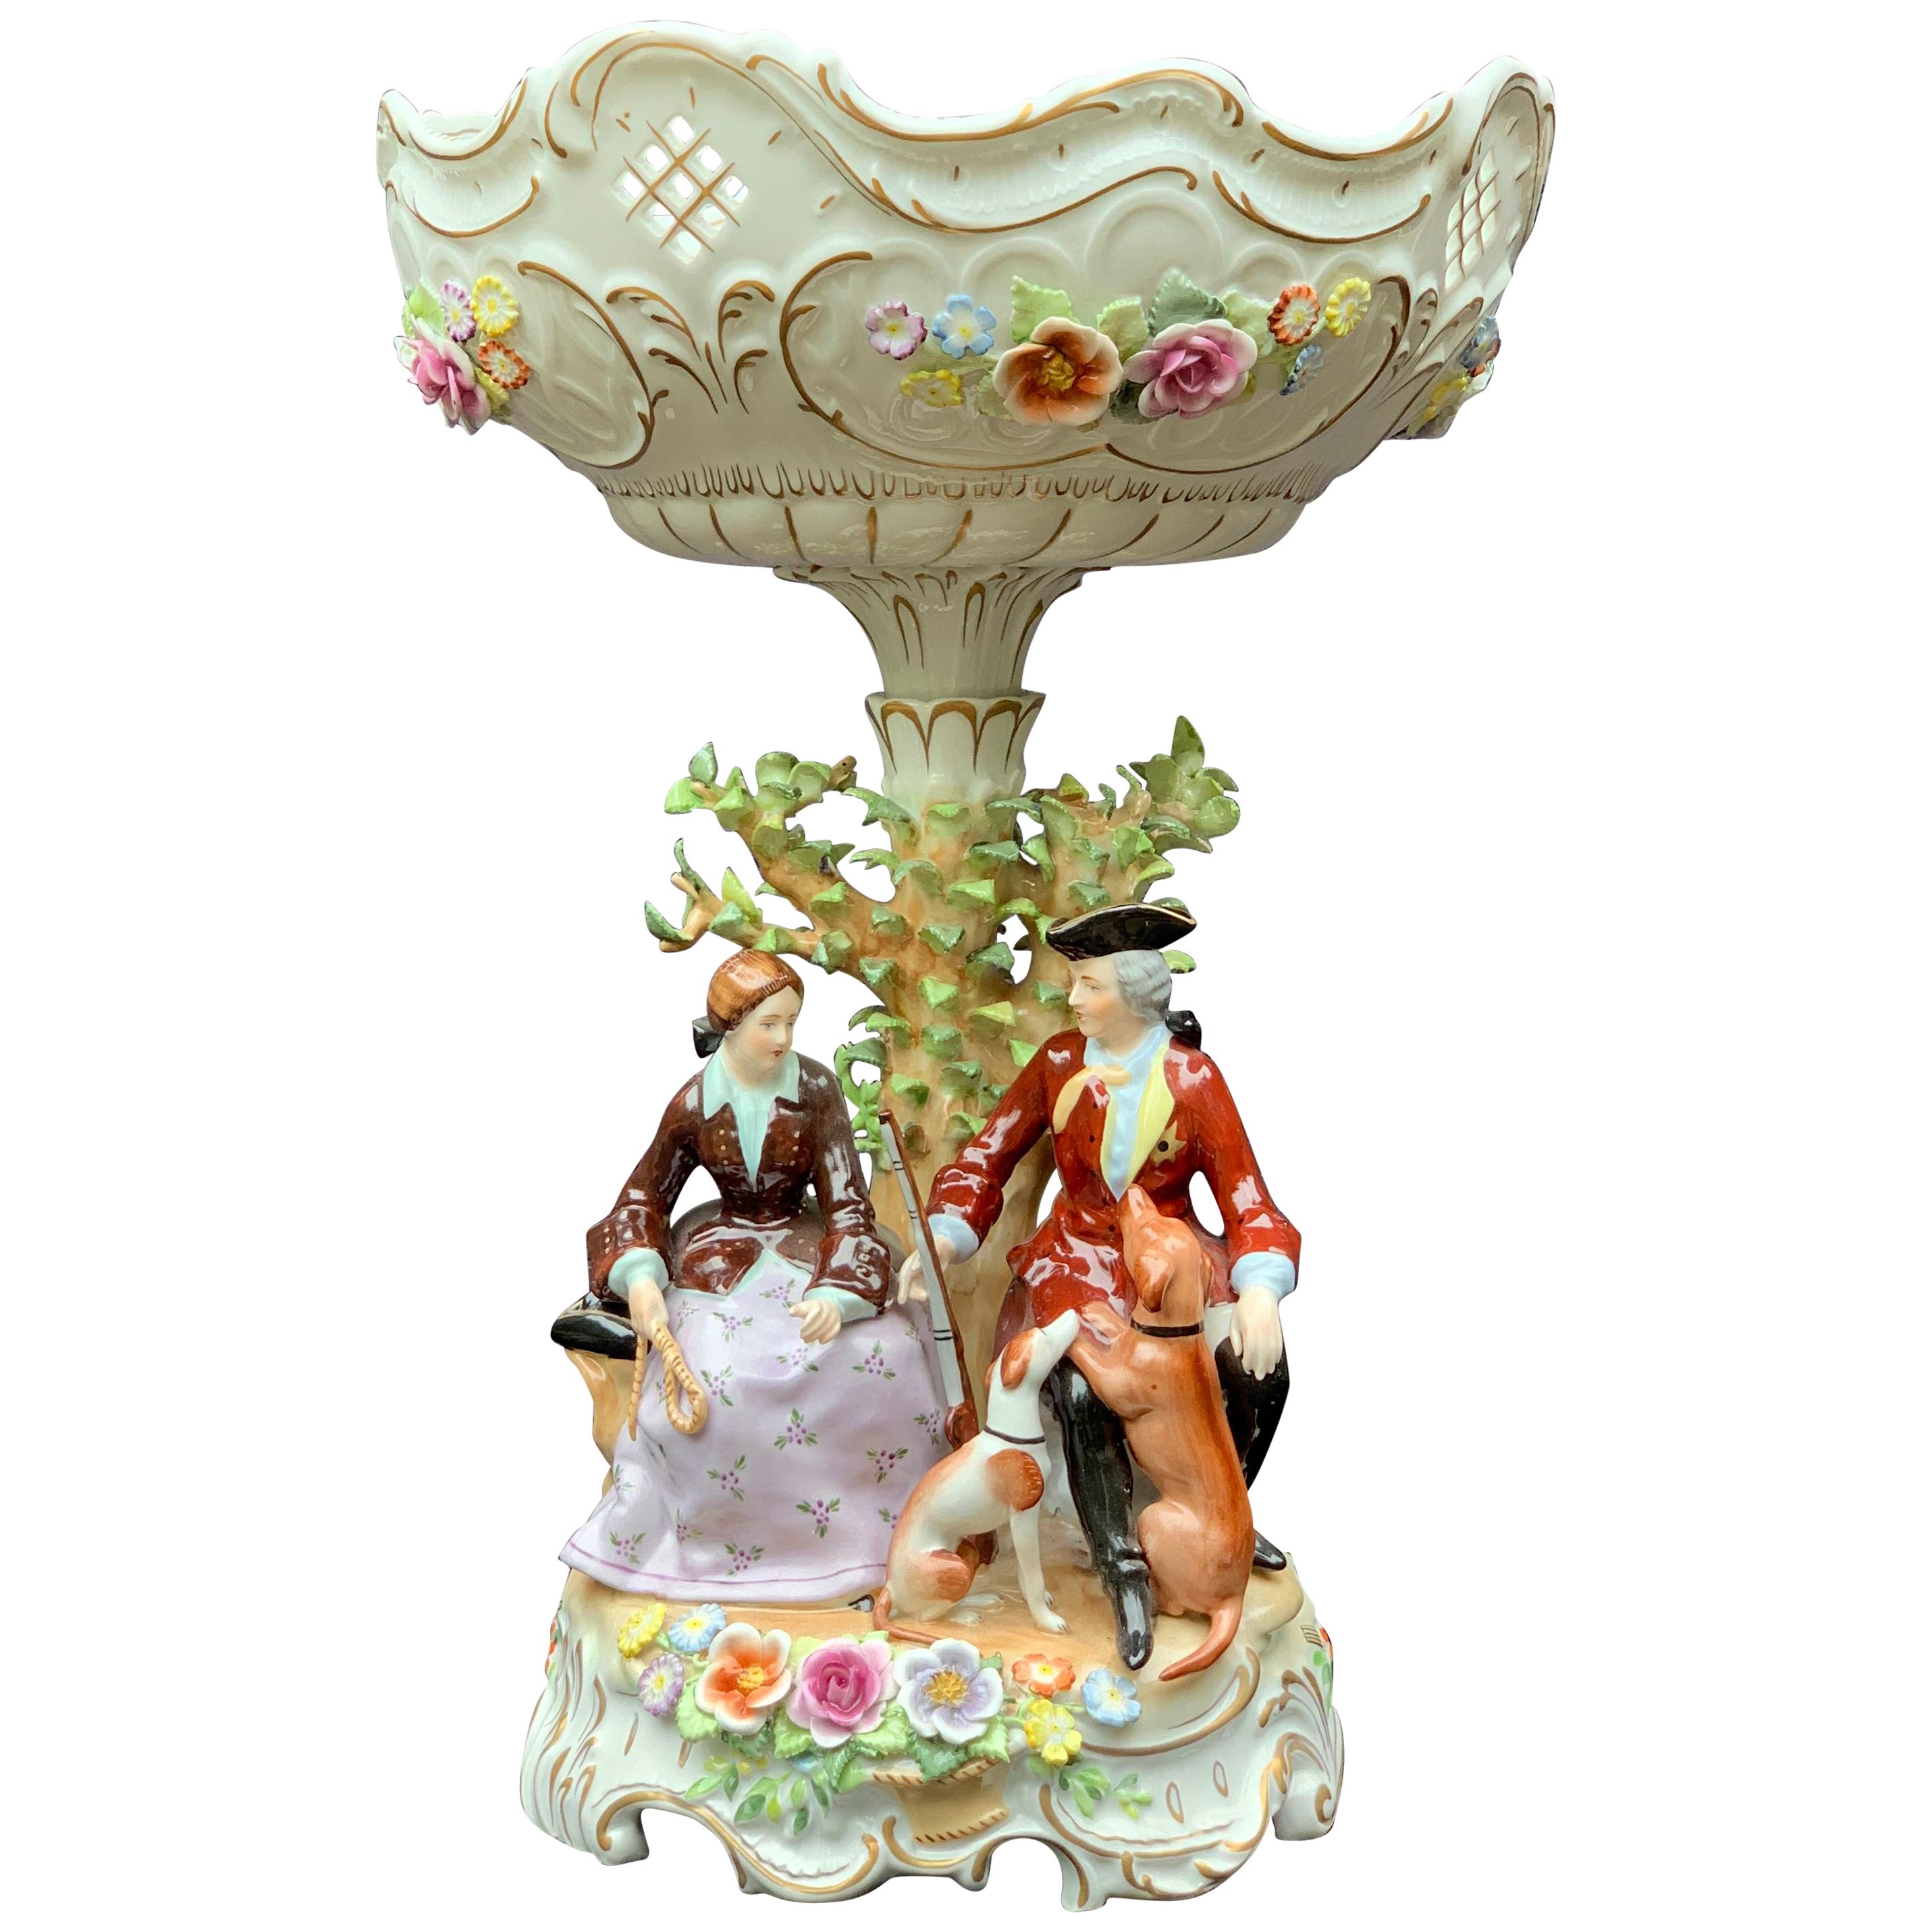 House of Schierholz Plaue Porcelain Flower Box with Figures, before 1989 For Sale